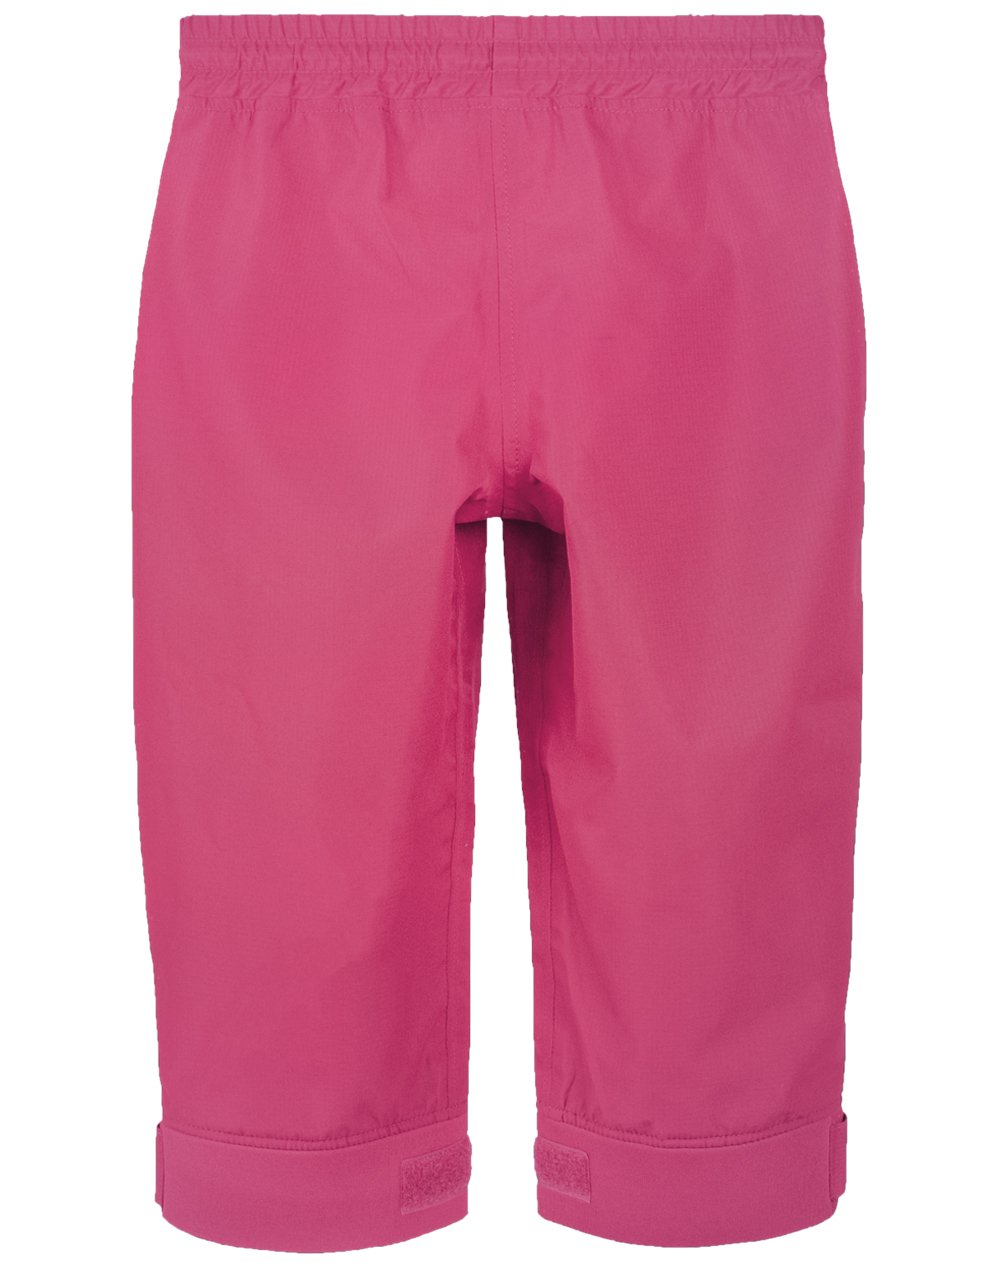 Oakiwear Children's Trail and Rain Pants for Kids & Toddlers